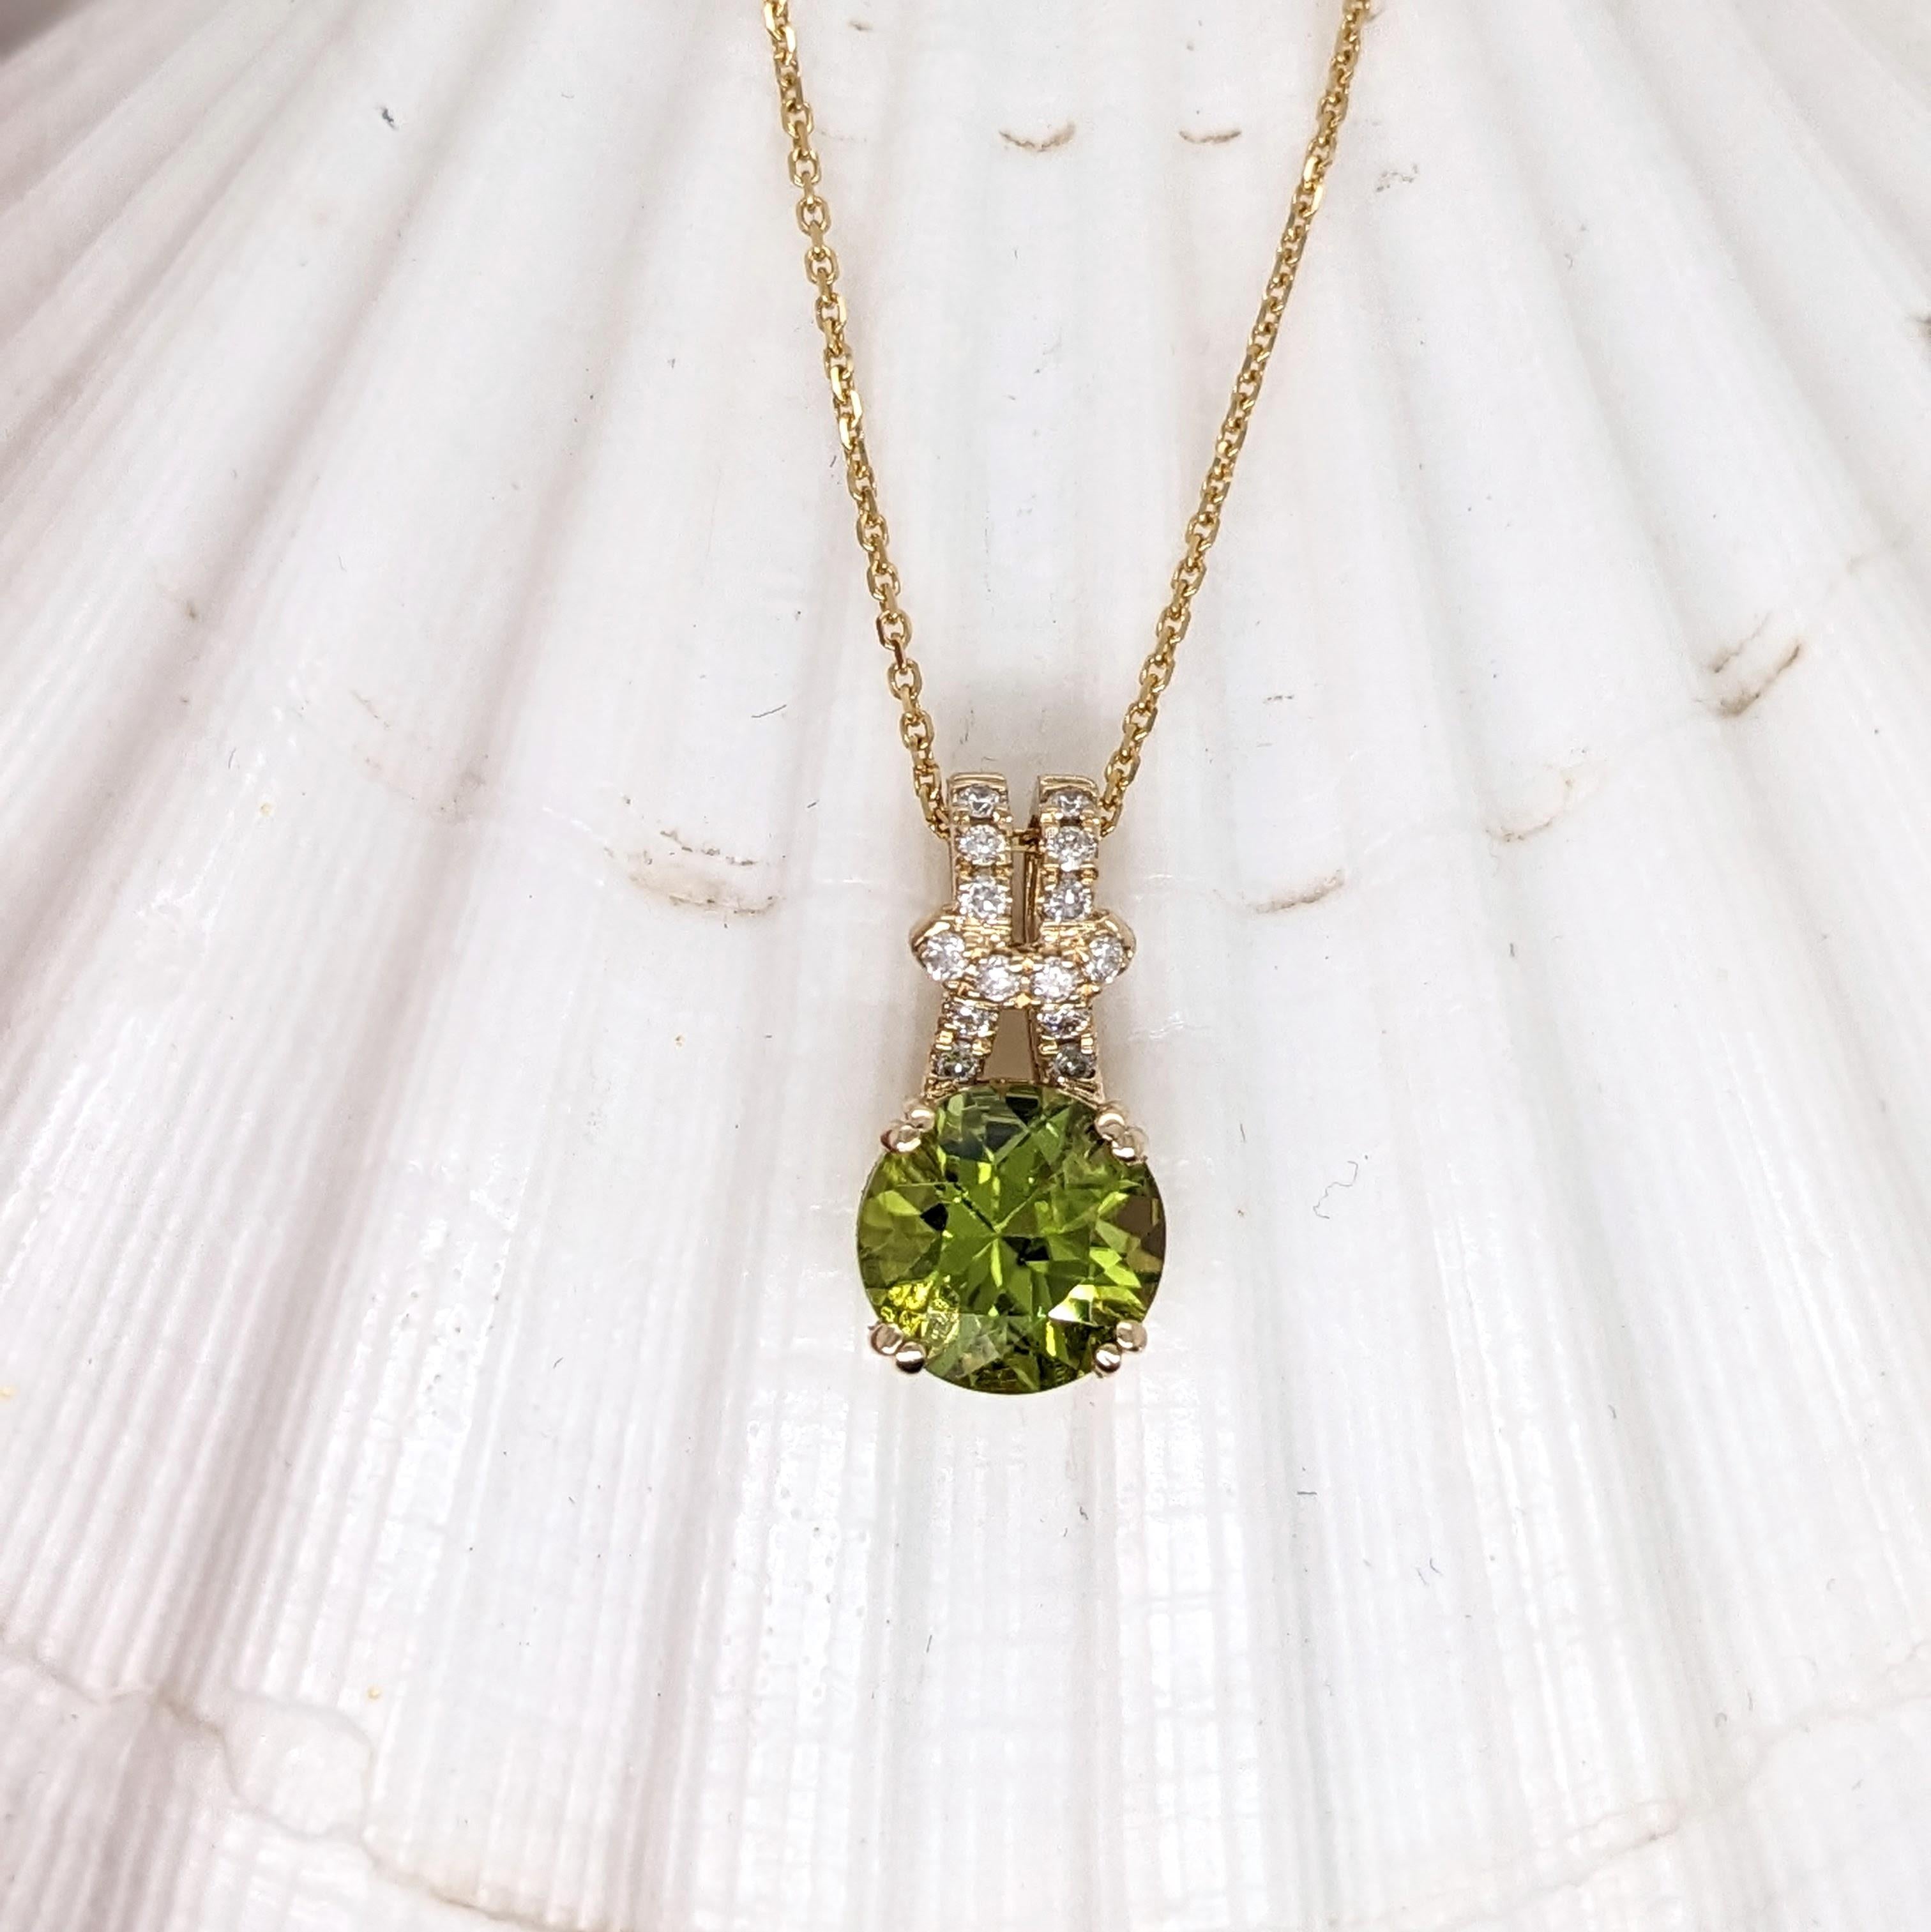 2.1ct Peridot Pendant w Natural Diamonds in Solid 14K Yellow Gold Round 8mm